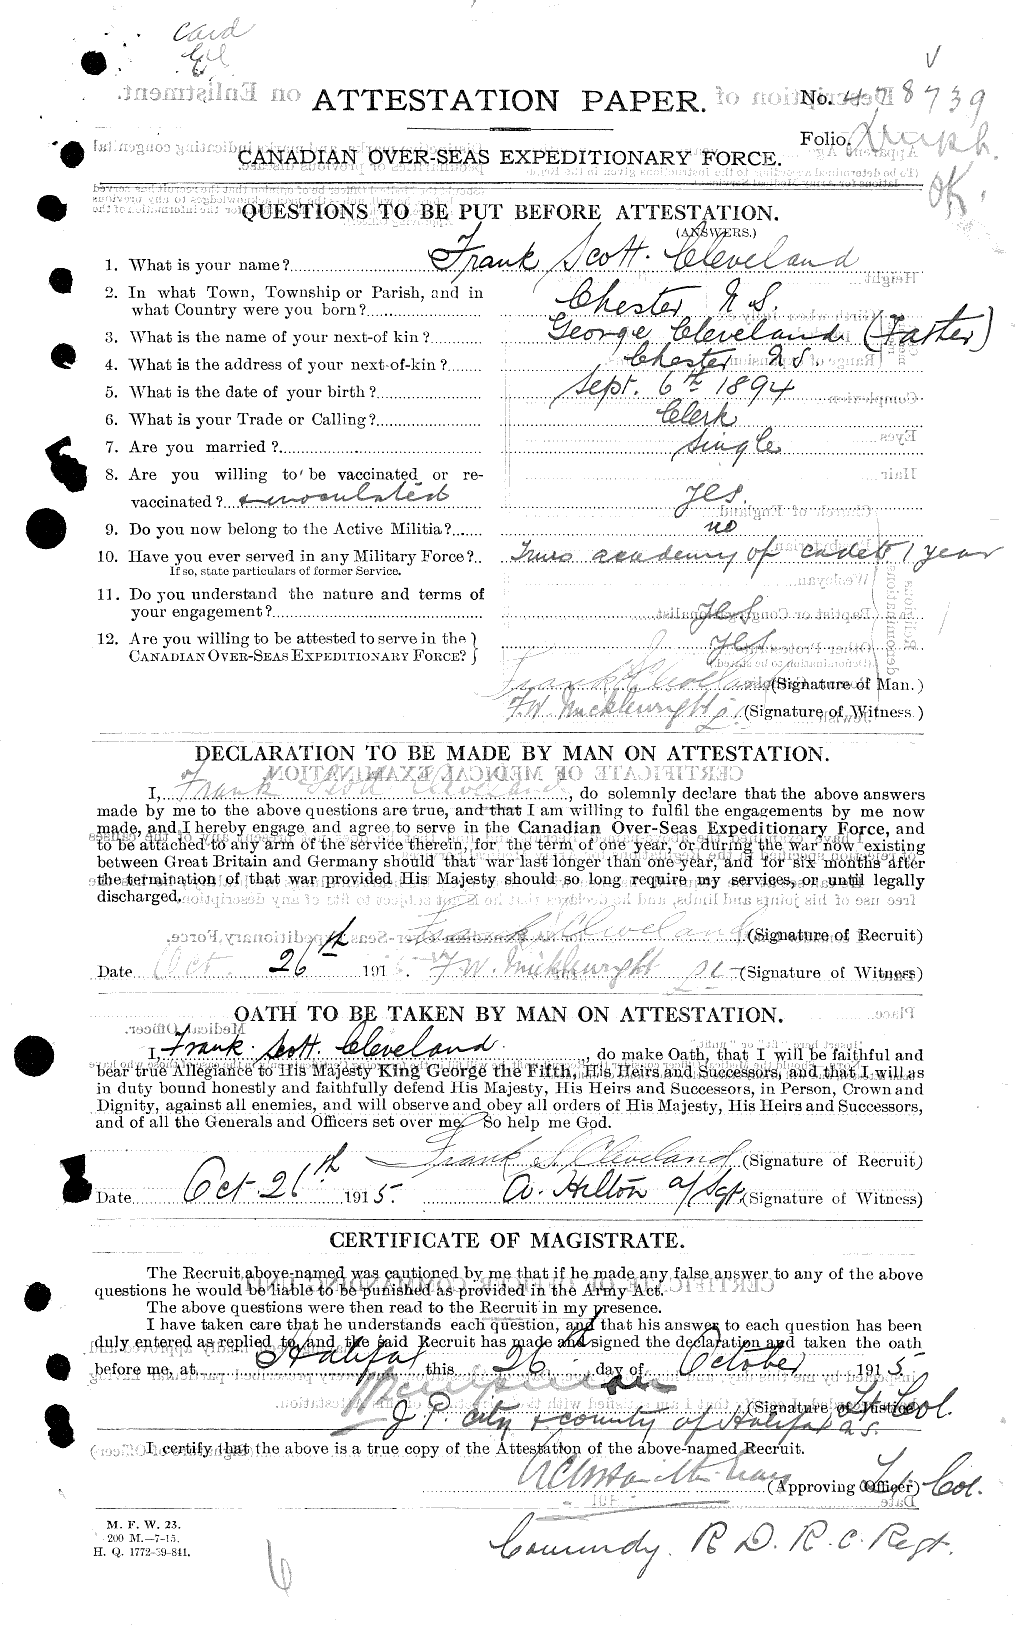 Personnel Records of the First World War - CEF 019480a